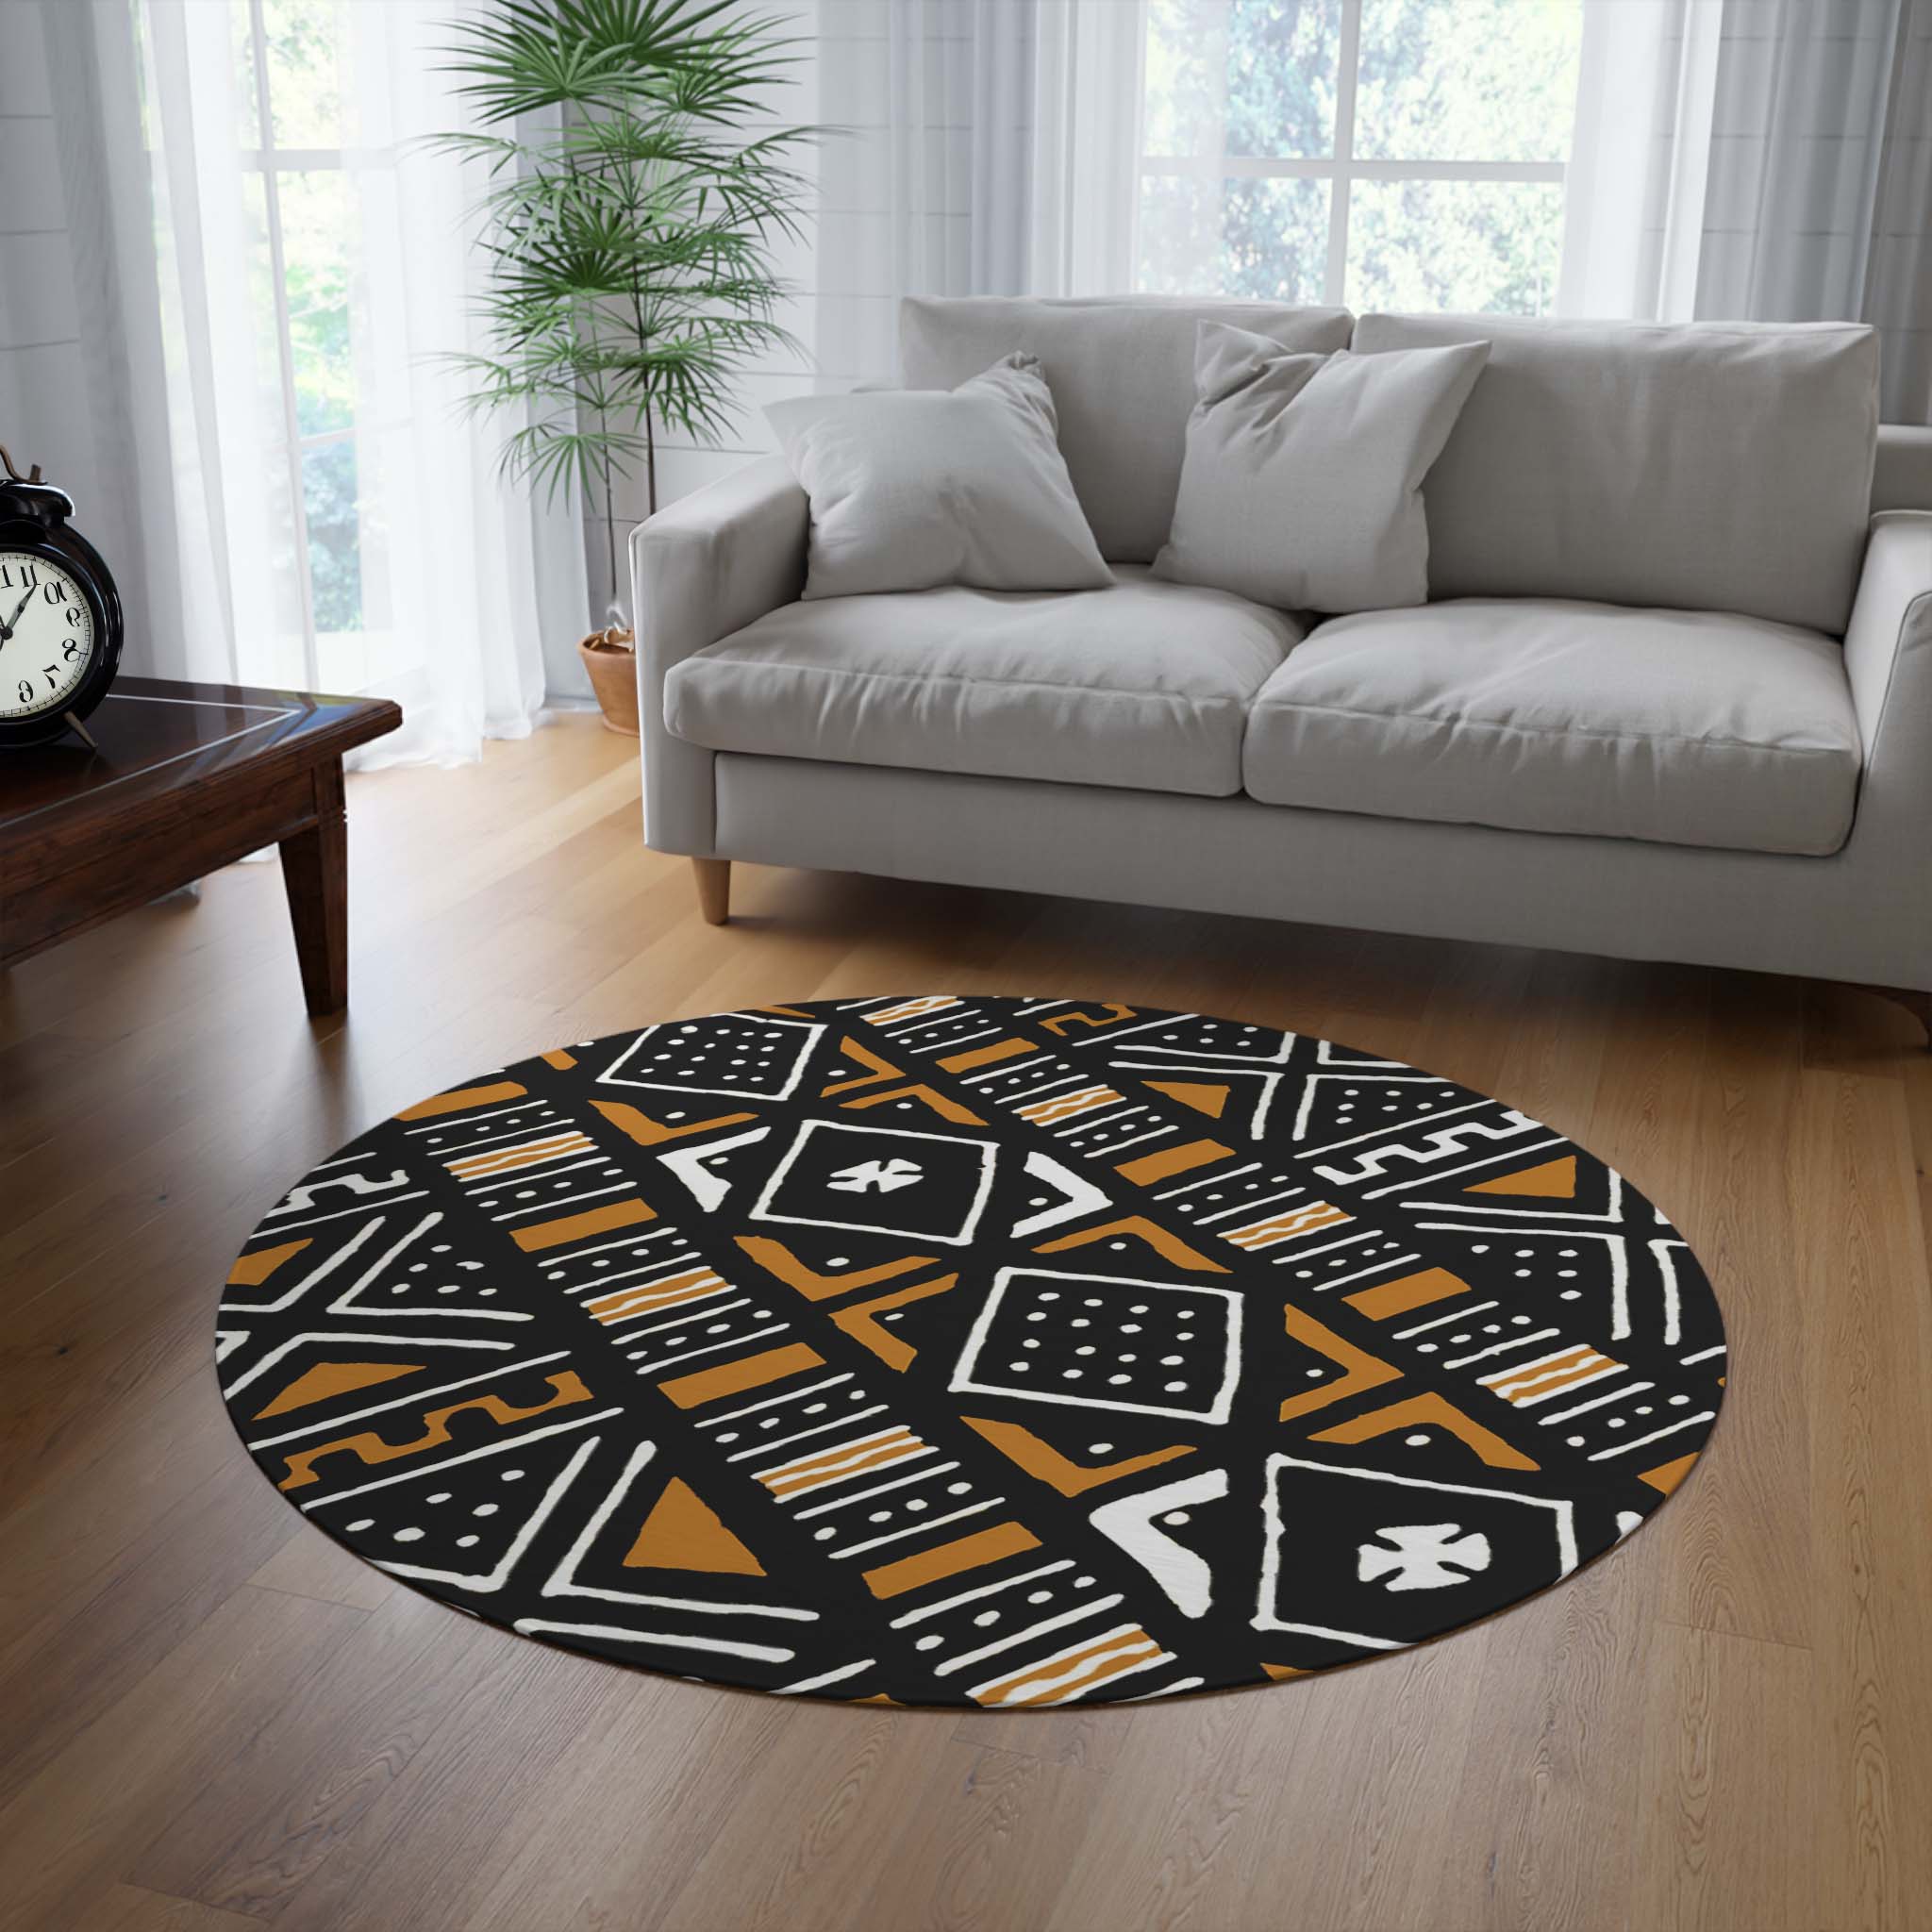 Round African Area Rugs Mudcloth Carpet - Bynelo